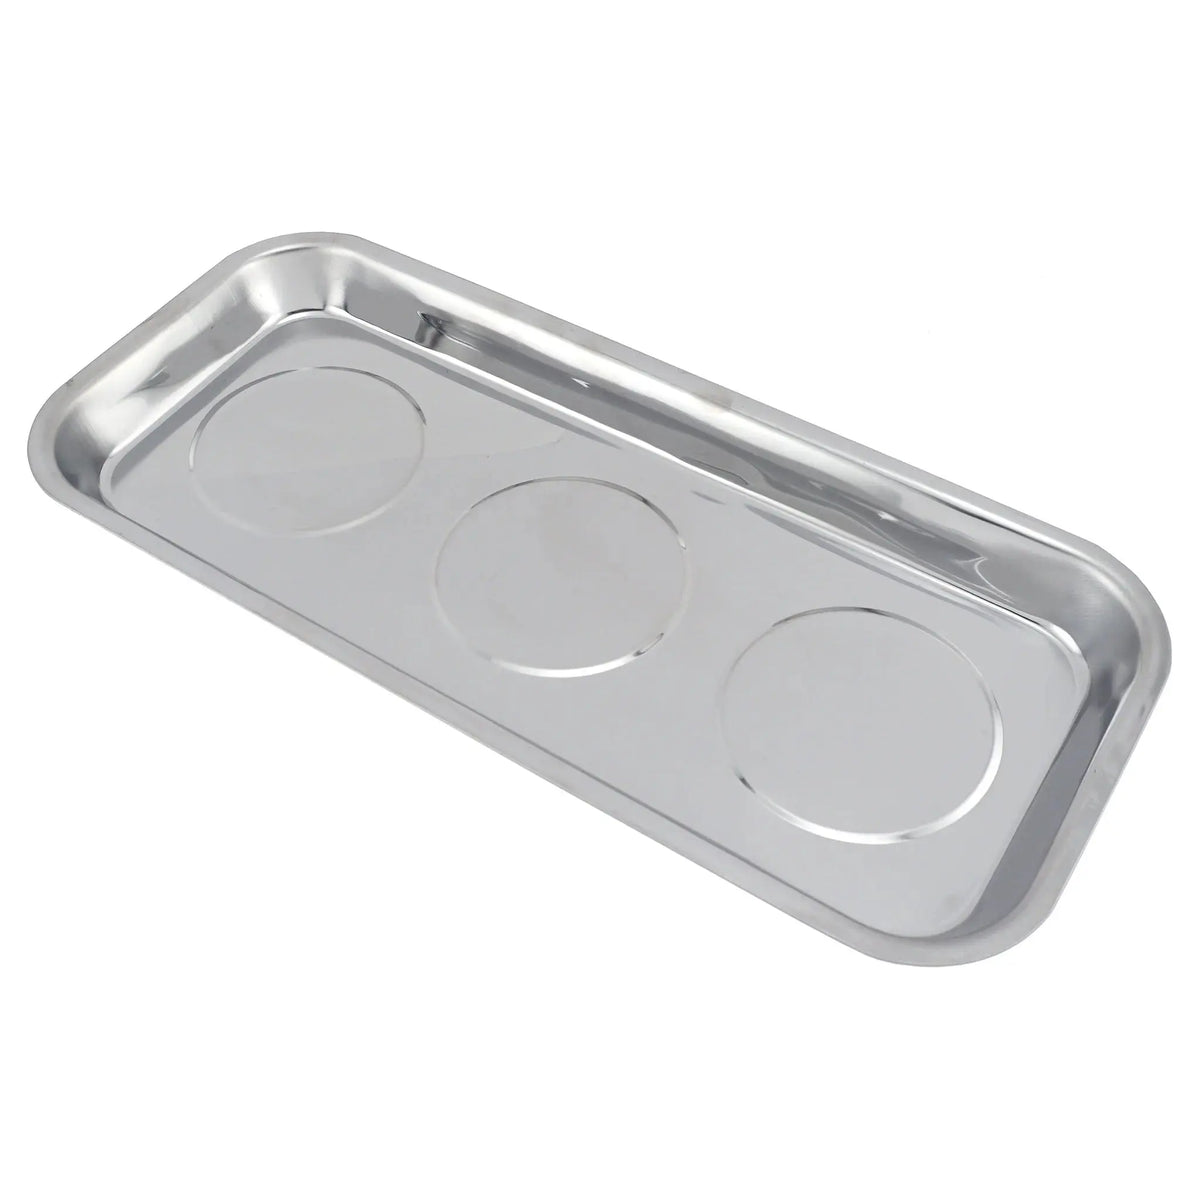 Blue Point Magnetic Tray BluePoint